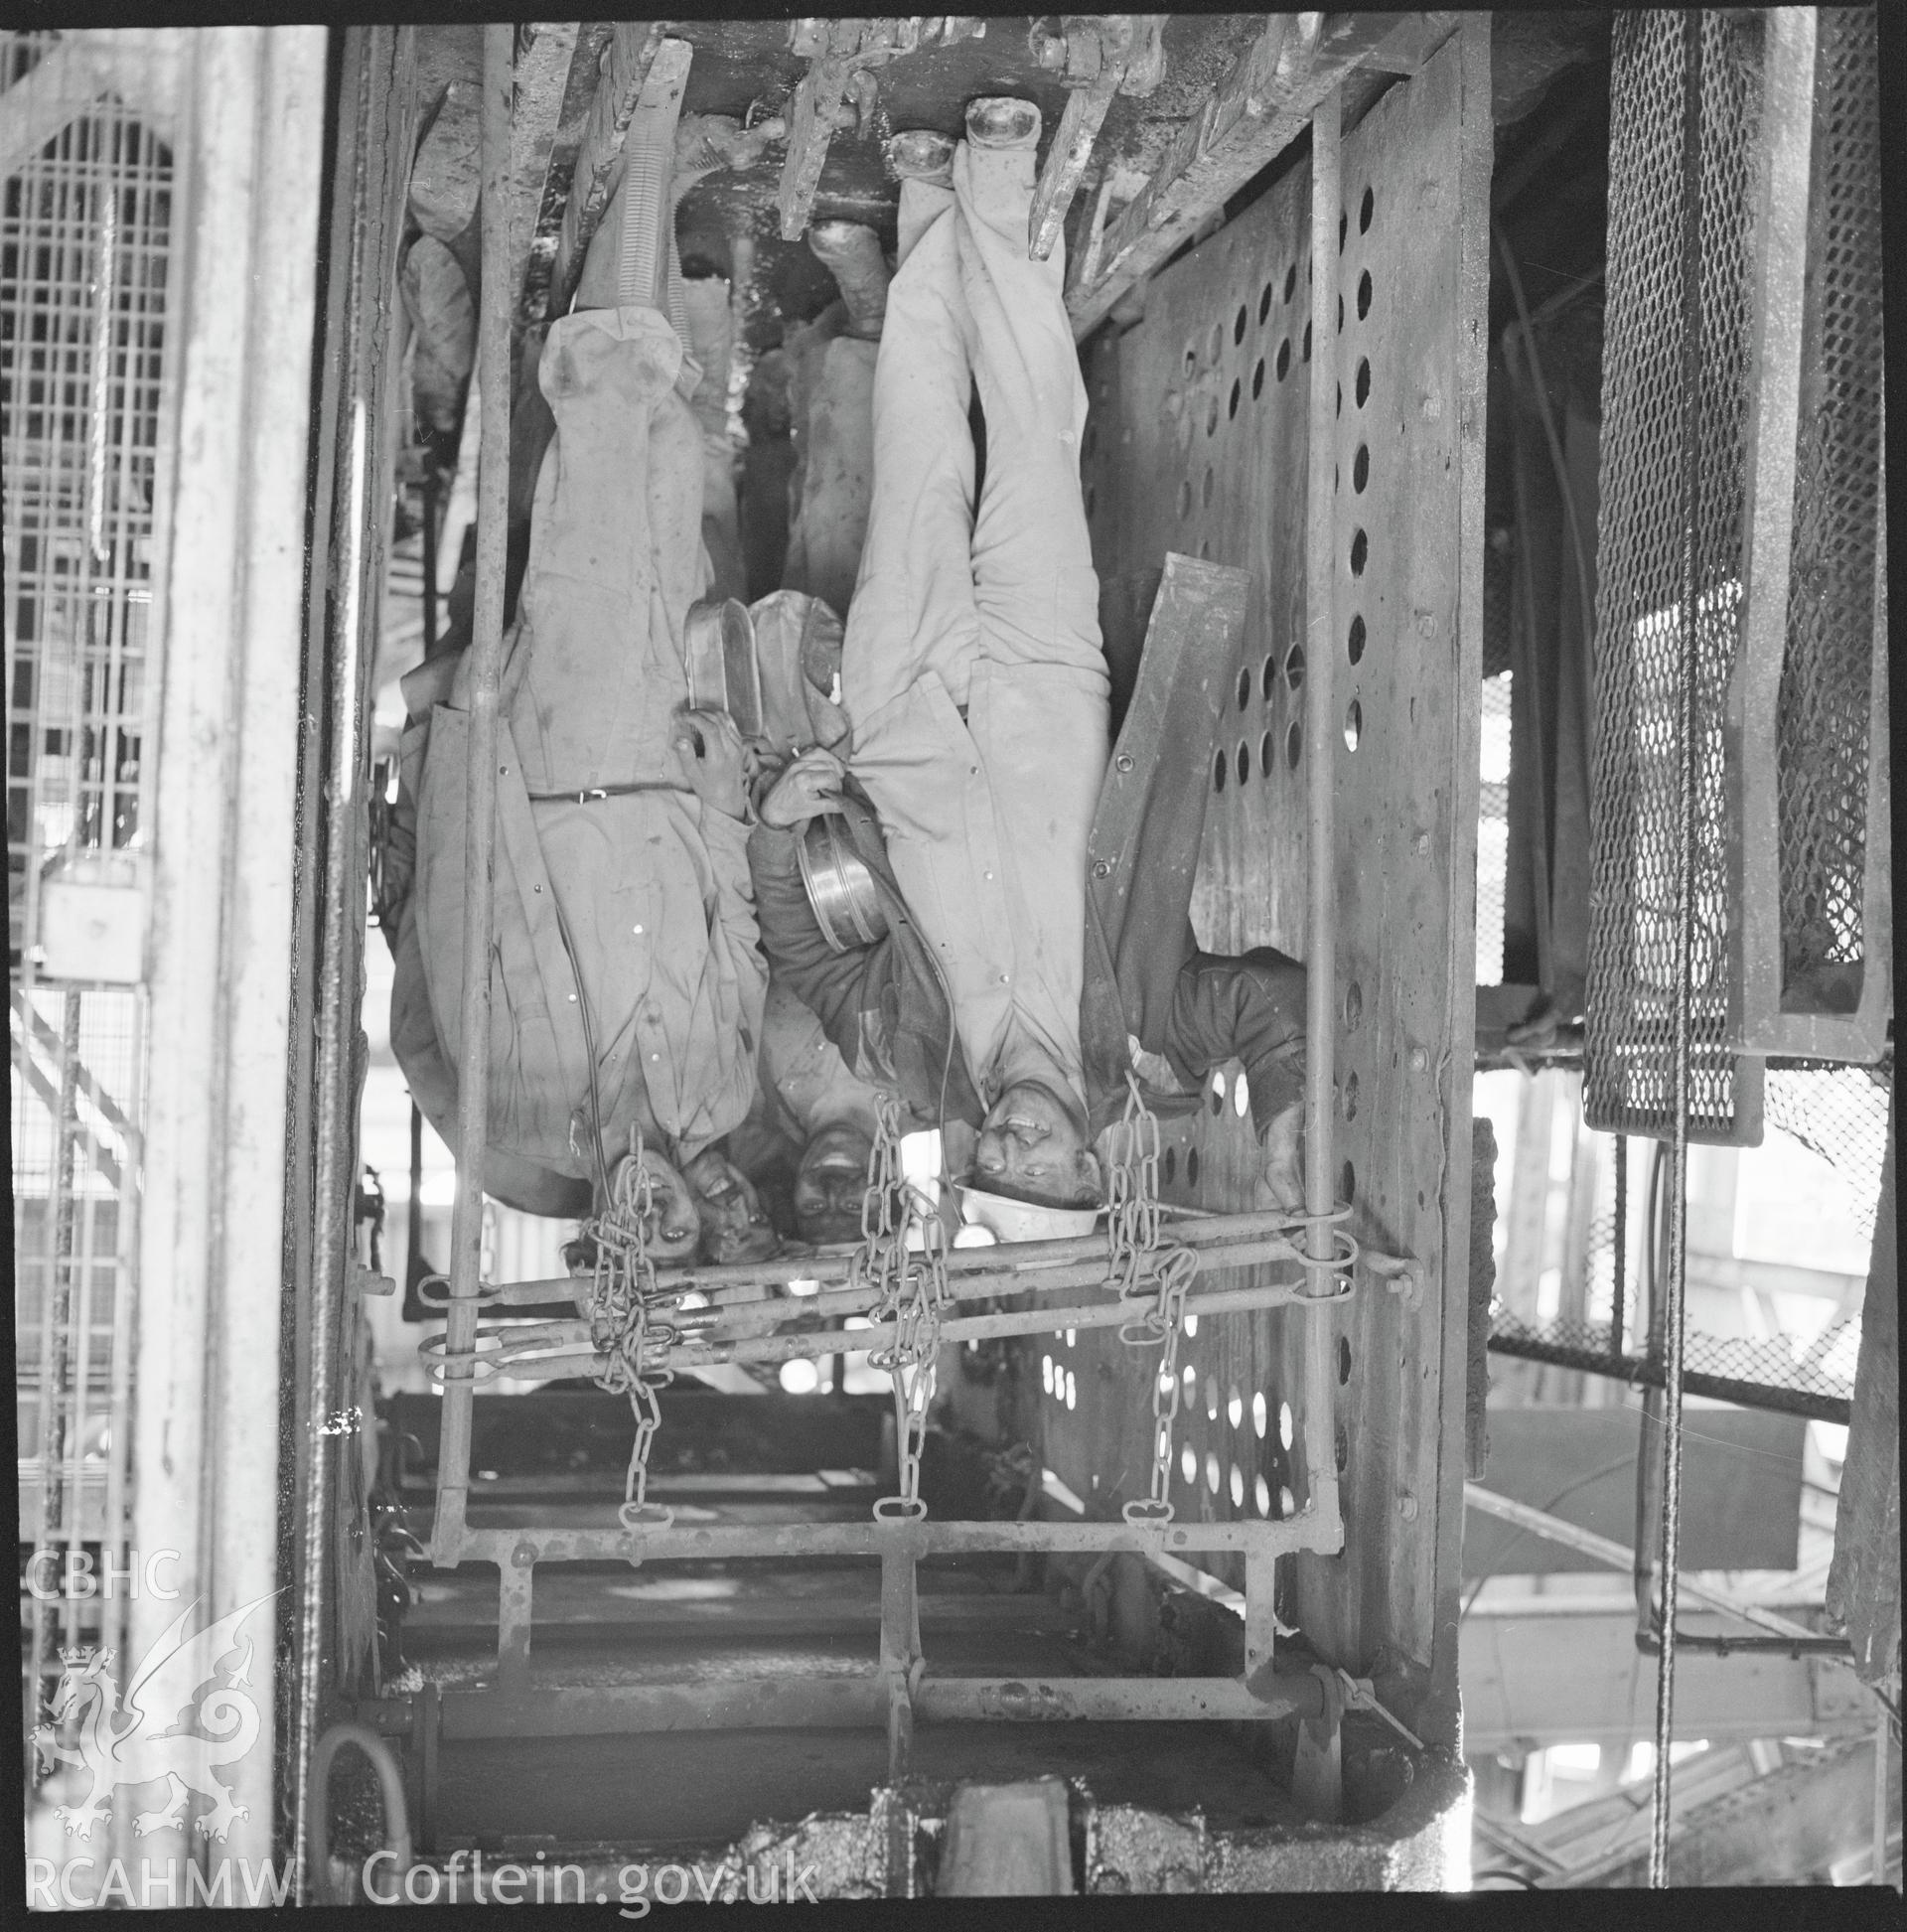 Digital copy of an acetate negative showing afternoon shift in cage at Taff Colliery, from the John Cornwell Collection.